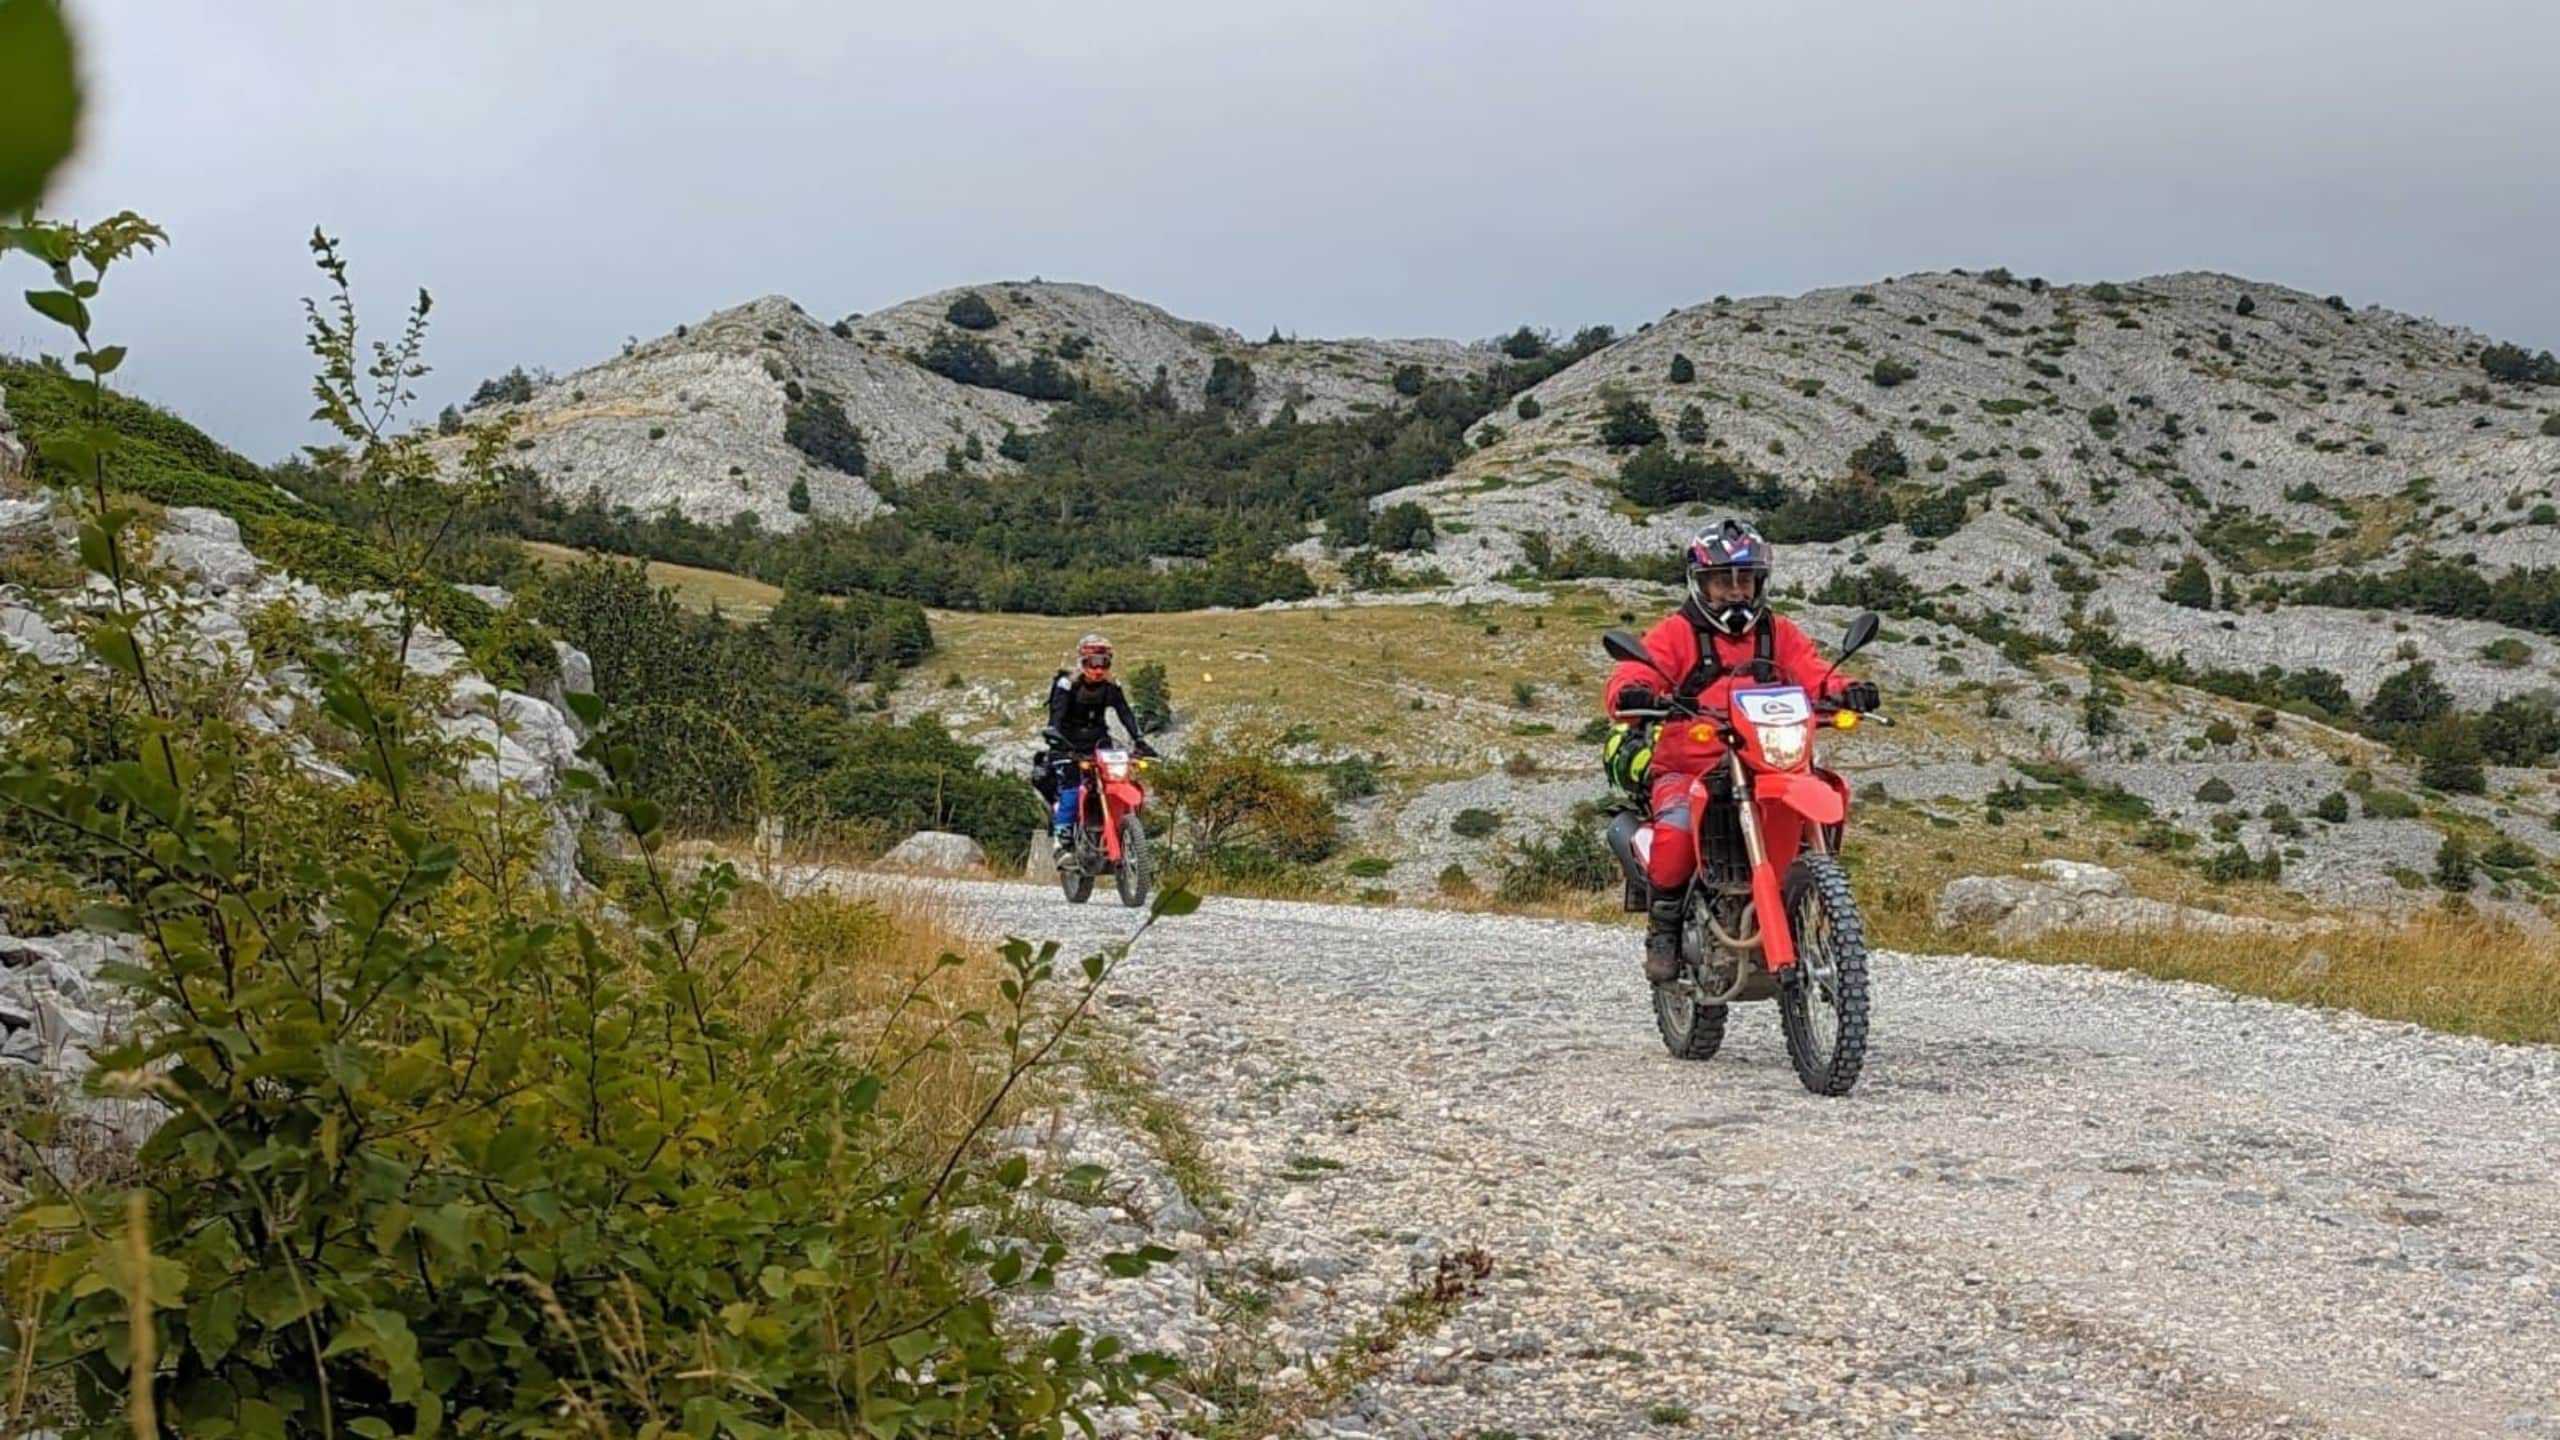 Funmoto ADVentures sightseeing 4 day only womens motorcycle tour in Croatia riding the Mali Alan pass